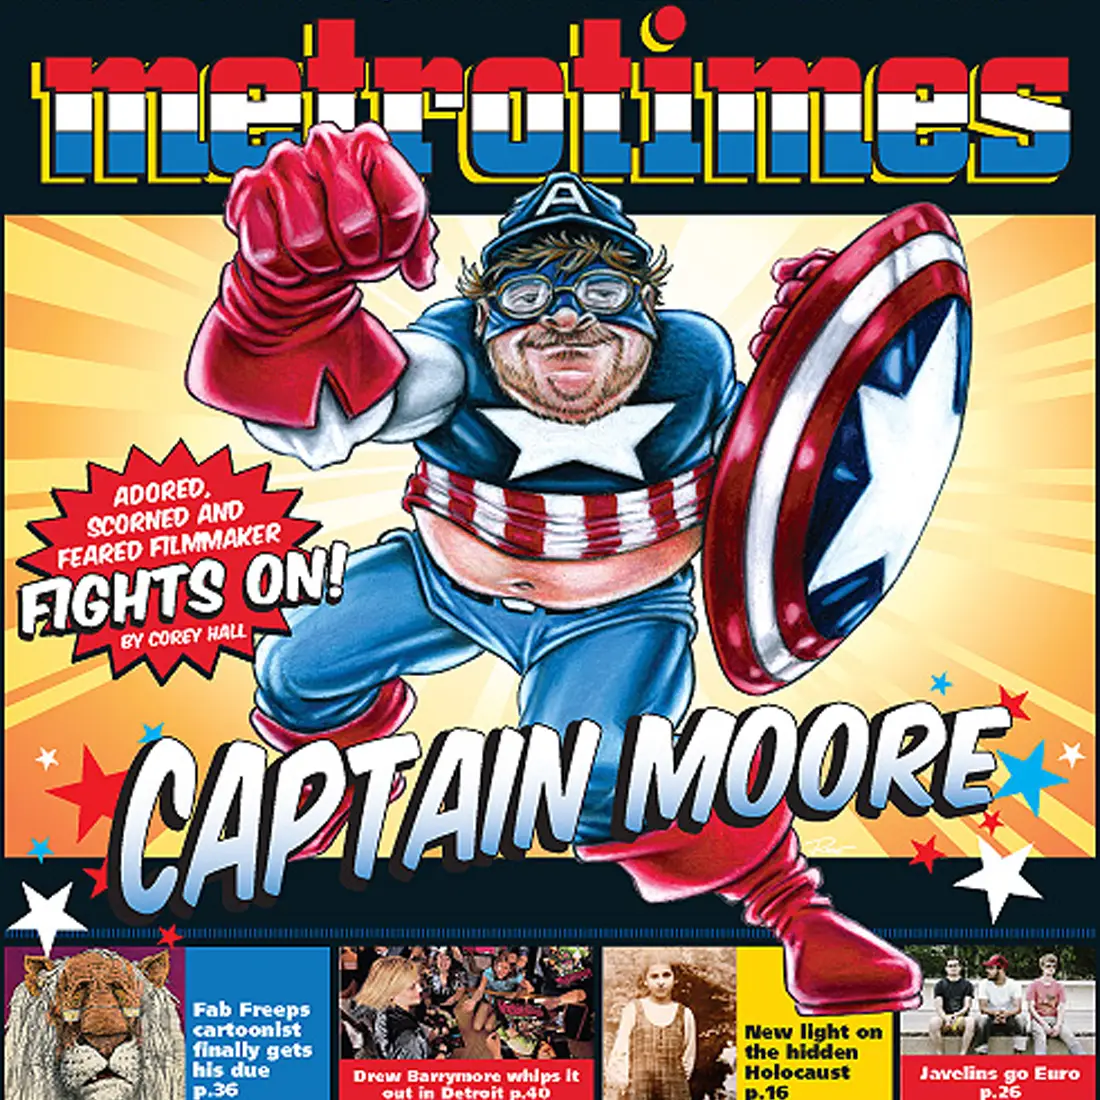 Metrotimes illustration of Captain Moore by RCi